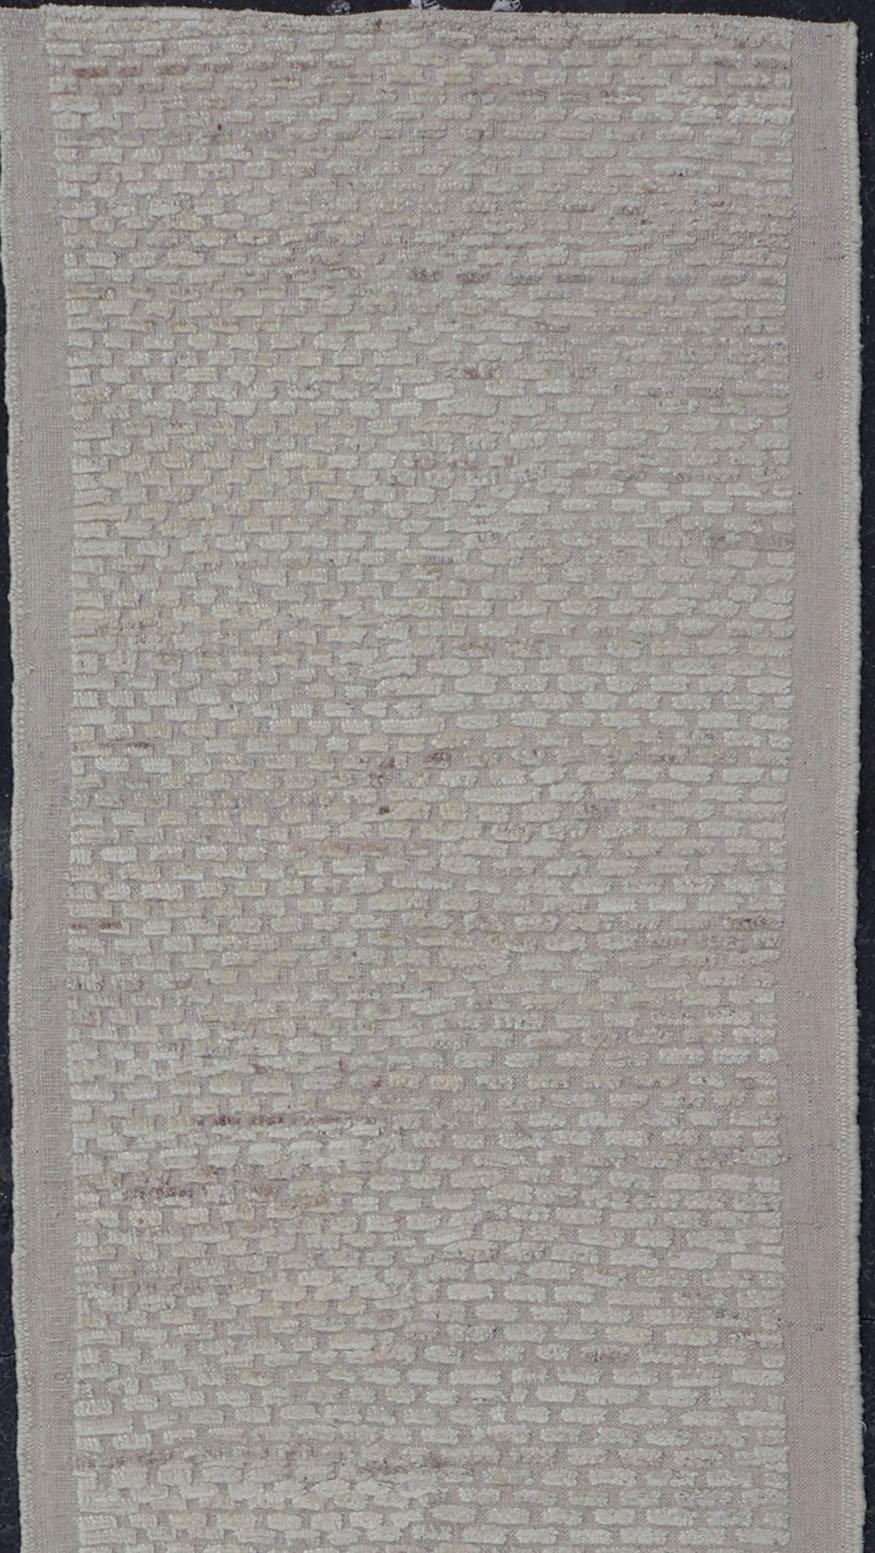 Modern piled and kilim runner with creamy color and variation of random light taupe accents, Keivan Woven Arts / rug AFG-36104, country of origin / type: Afghanistan / Piled, condition: new

This Minimalist design runner features a modern solid